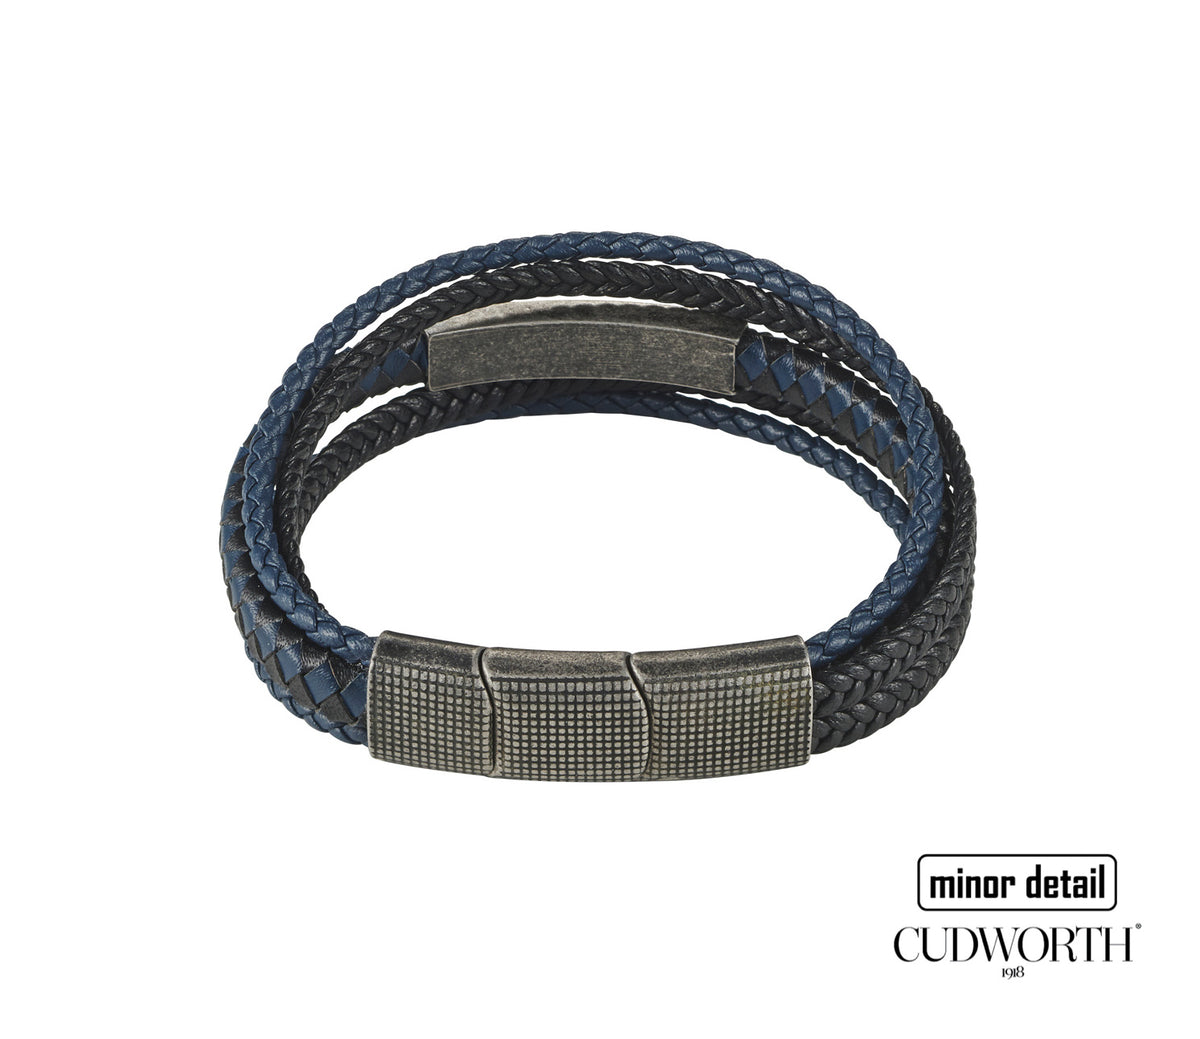 stacked mens bracelet in thin leather cords and steel clasp